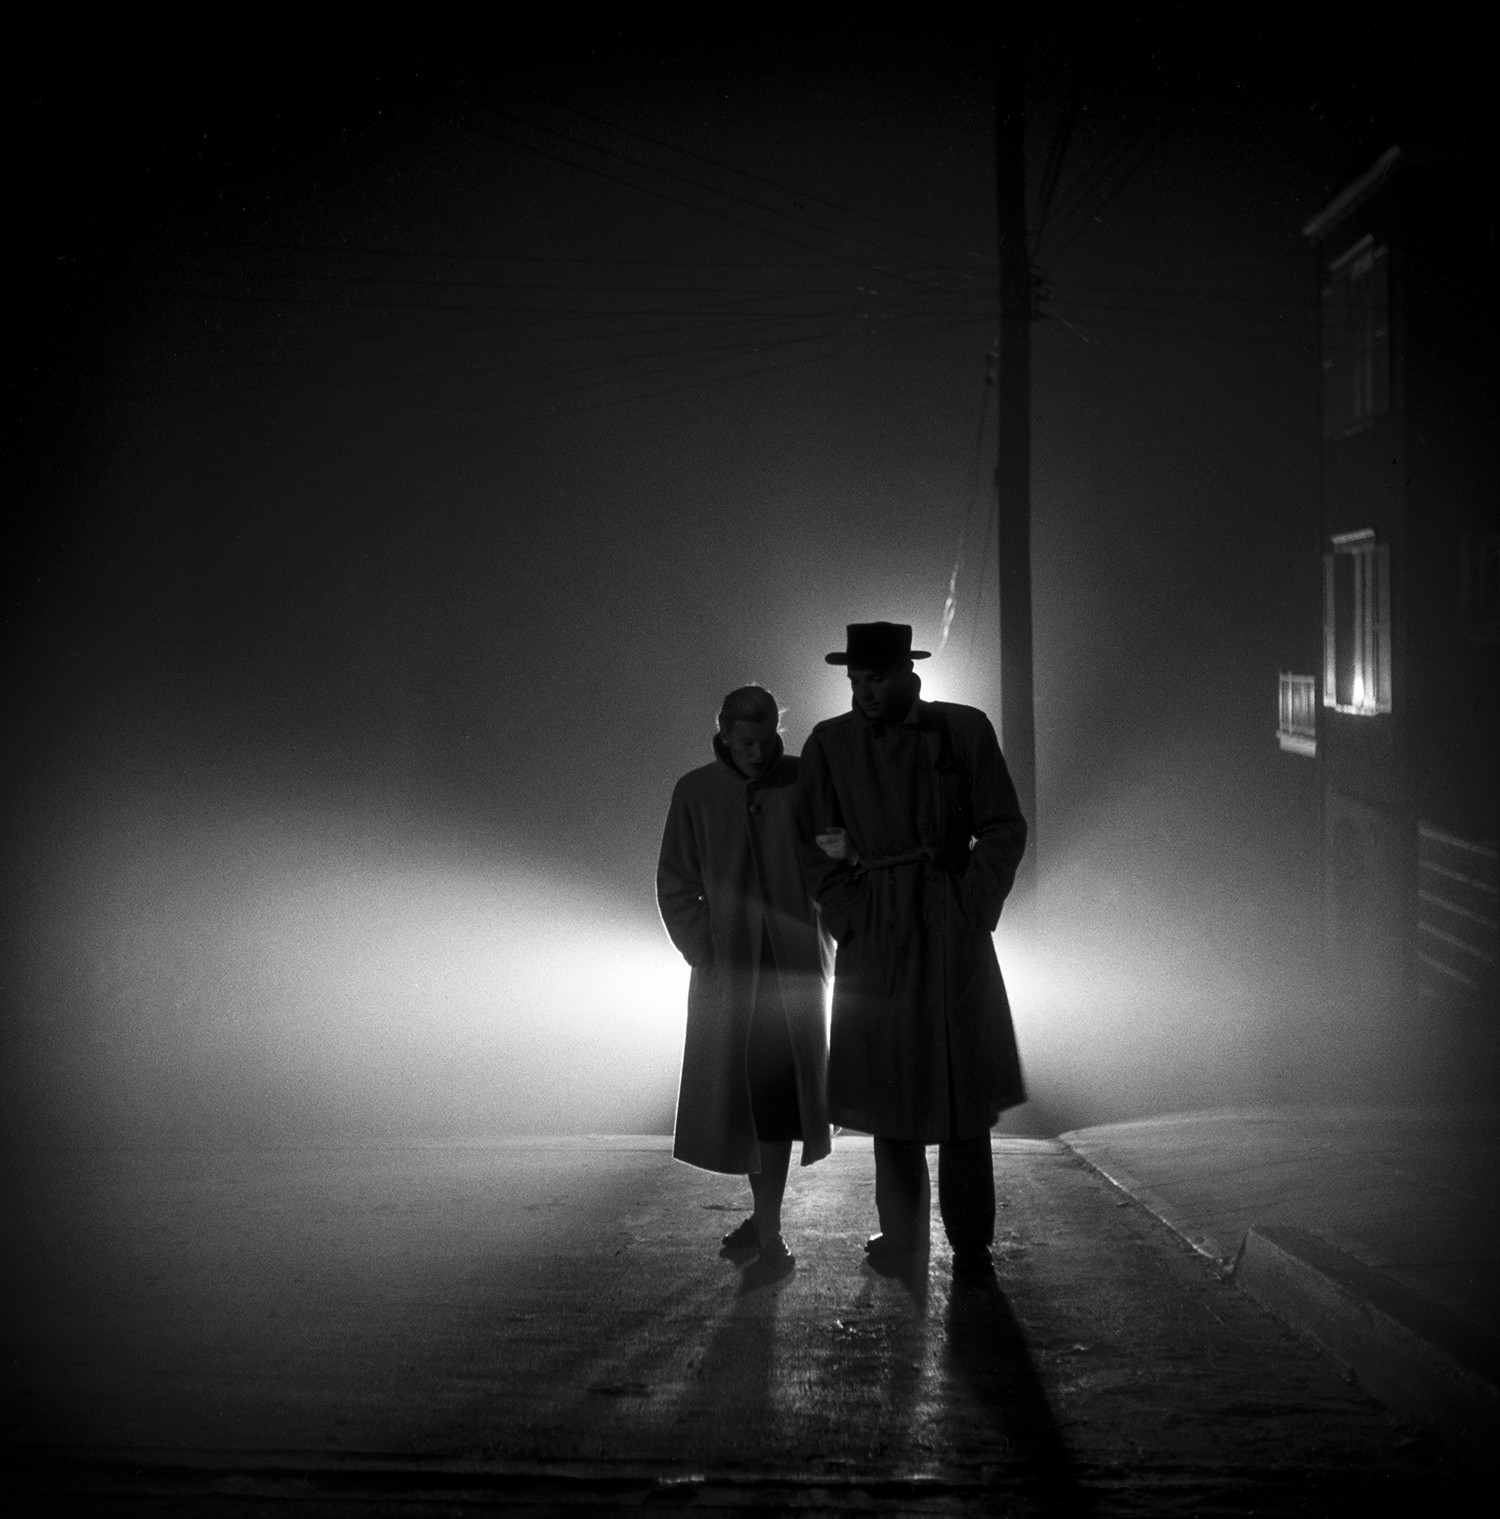 Fred Lyon shot "Foggy Night, Lands End" on a classic San Francisco evening, not far from the Pacific Ocean. It is one of his most successful photographs.